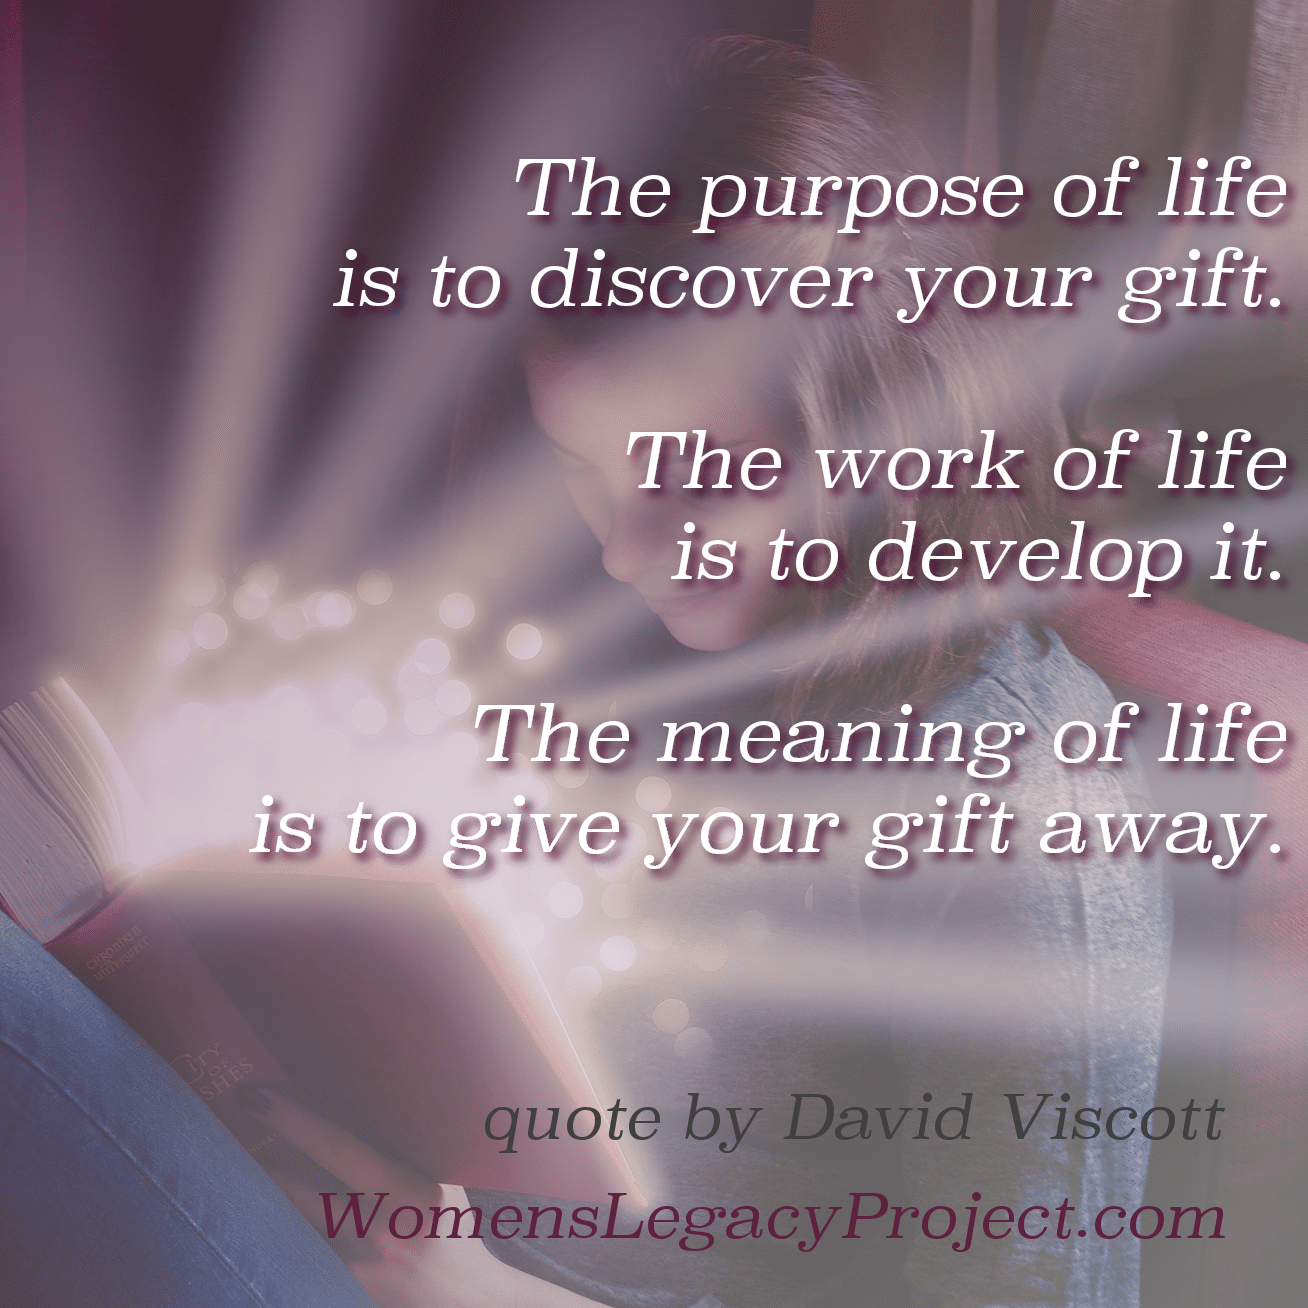 purpose and meaning of life quote by david viscott